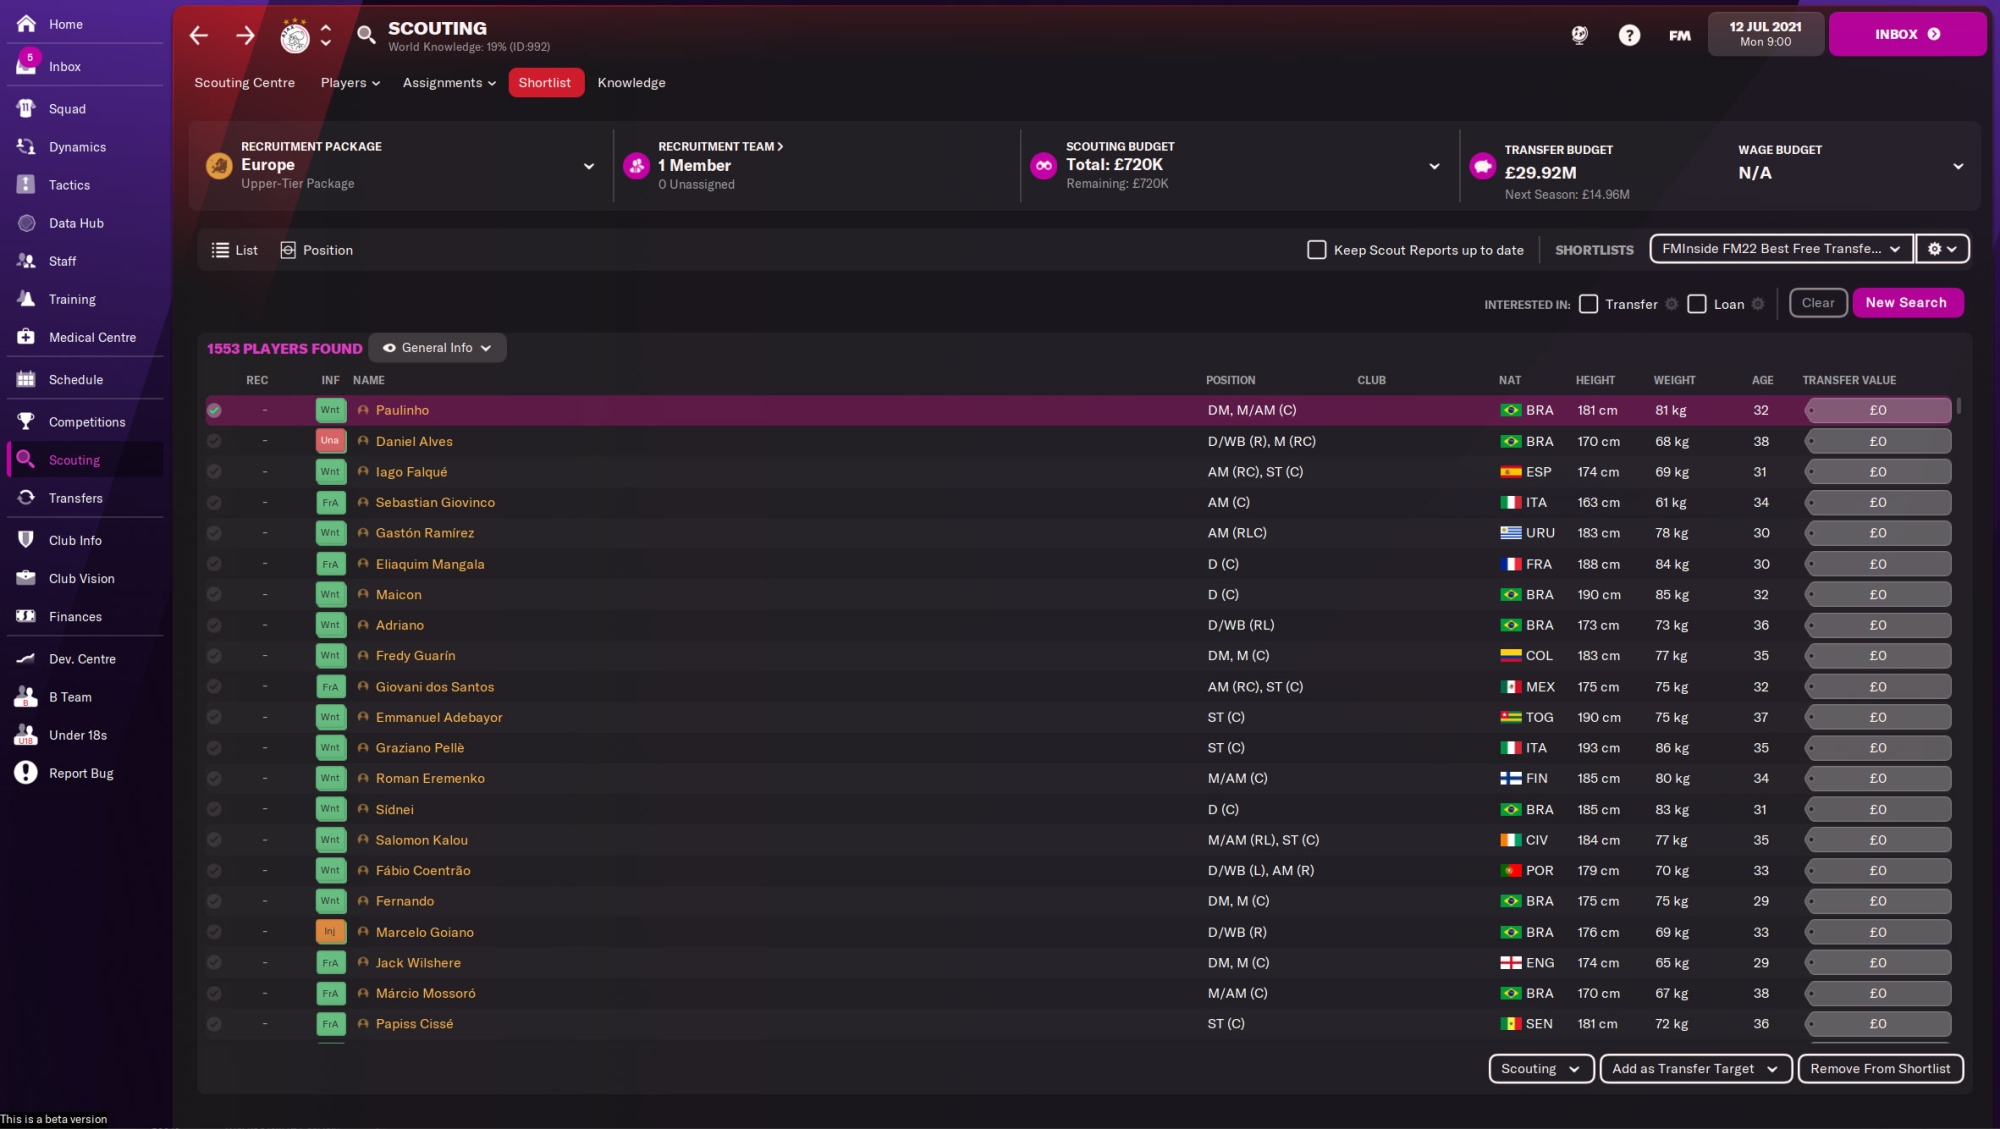 How to Find Free Agents in Football Manager - FMBrotherhood